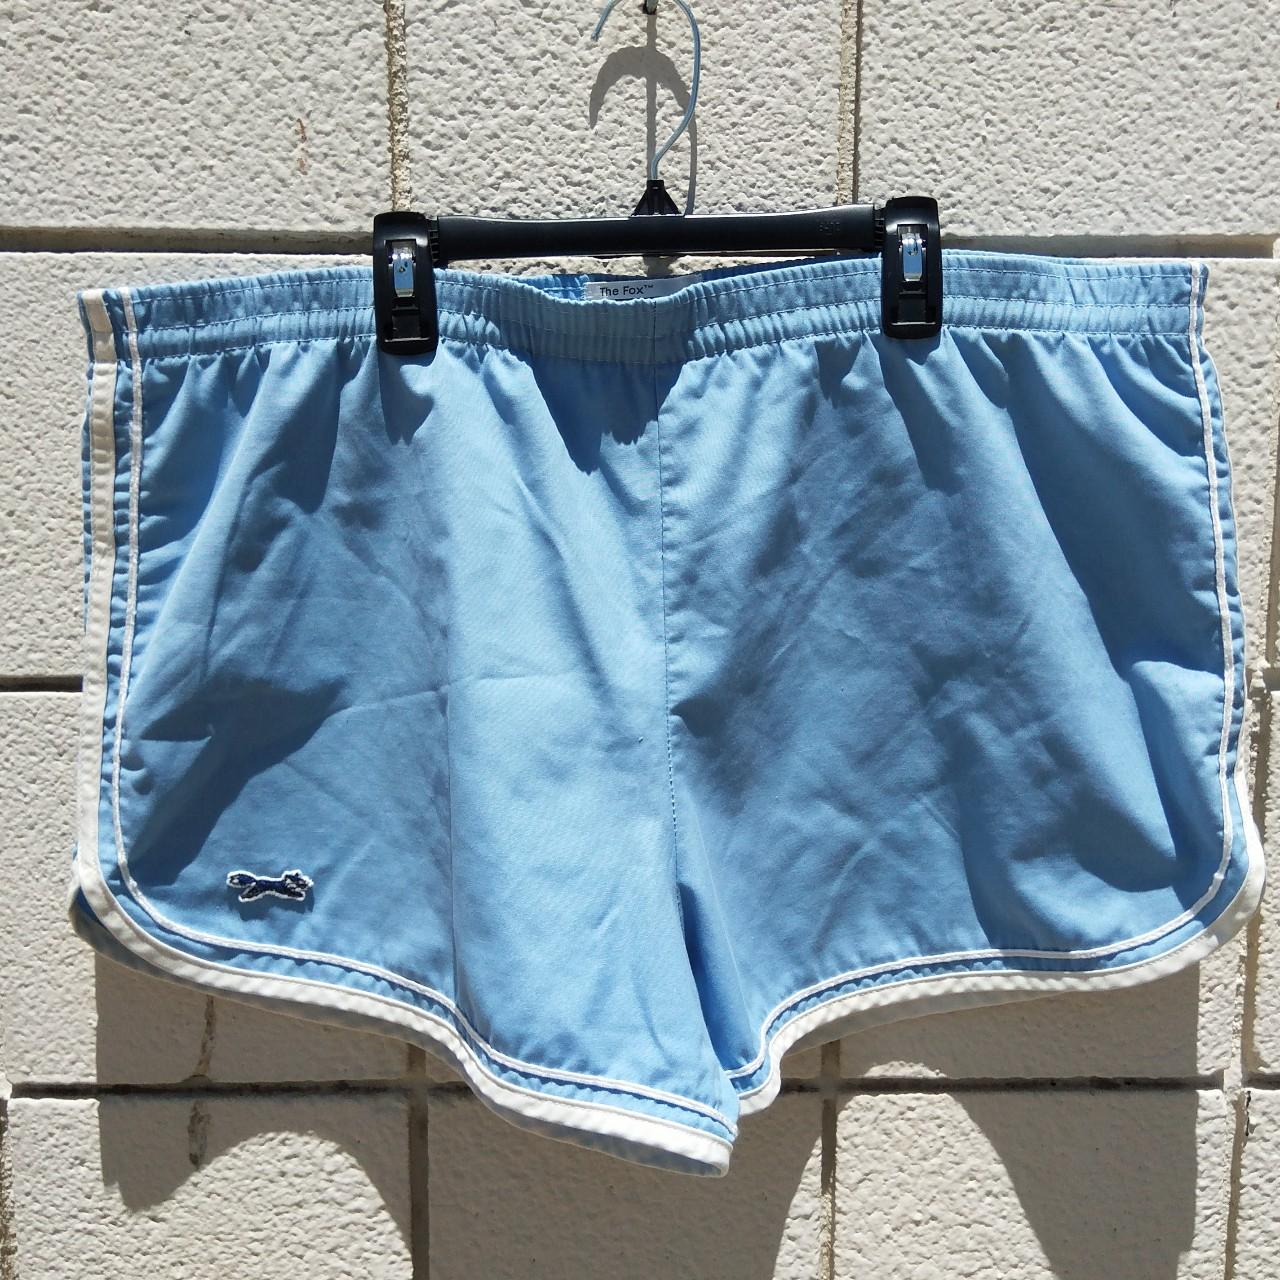 VINTAGE!!! Rare!!! 1970 the fox baby blue shorts by... - Depop